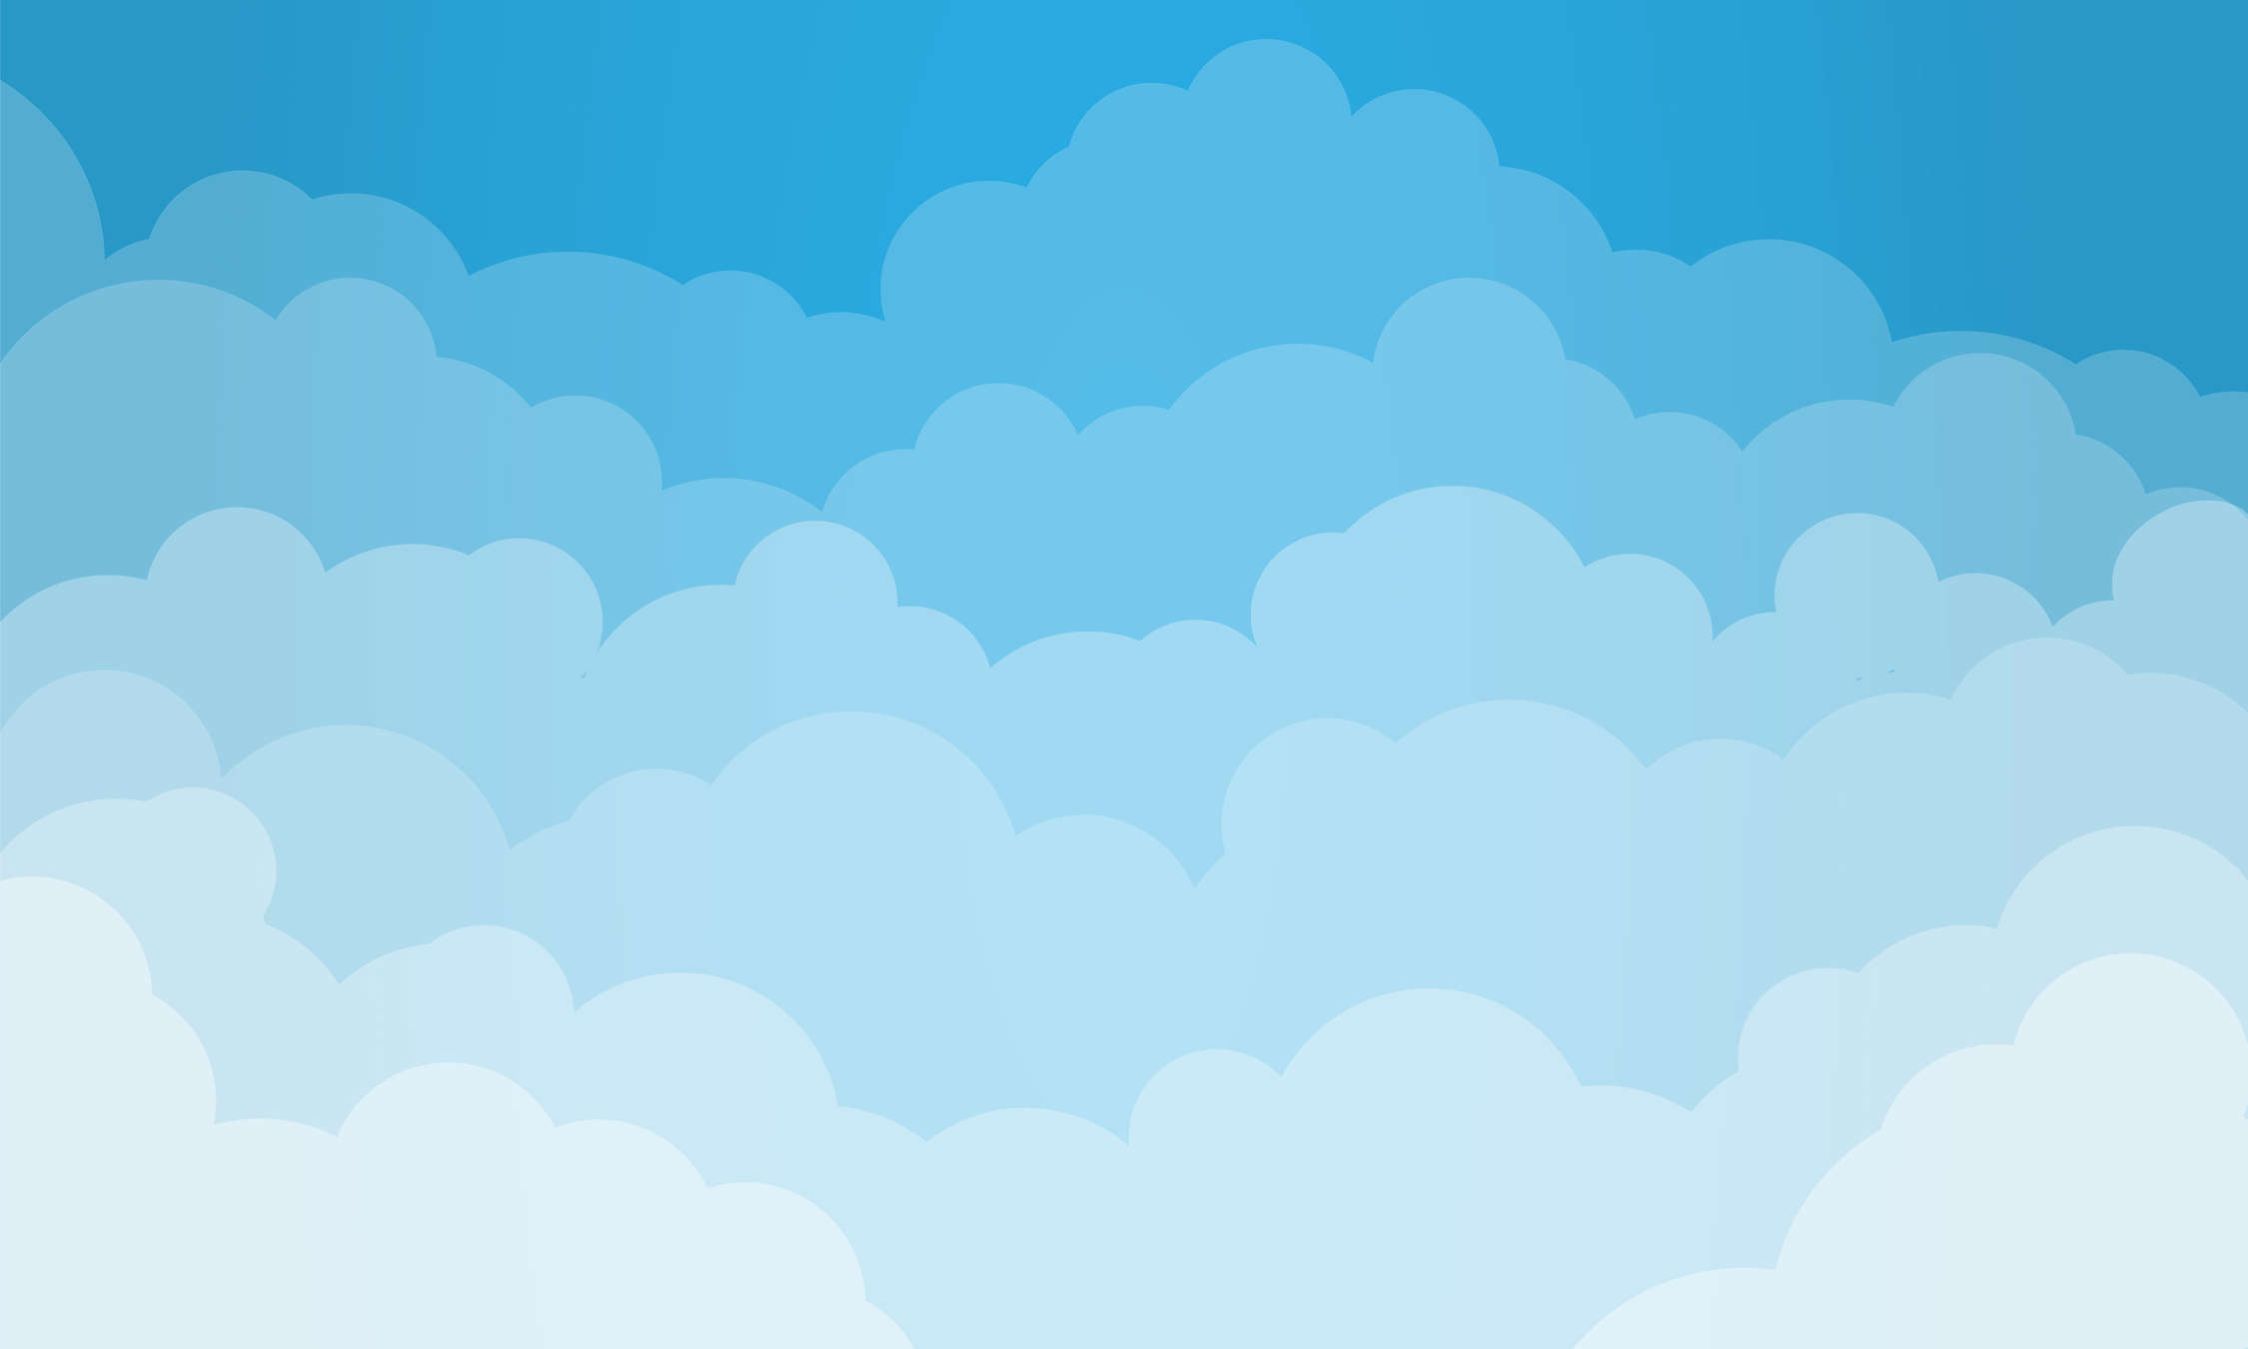             Photo wallpaper Sky with clouds in comic style - Smooth & matt non-woven
        